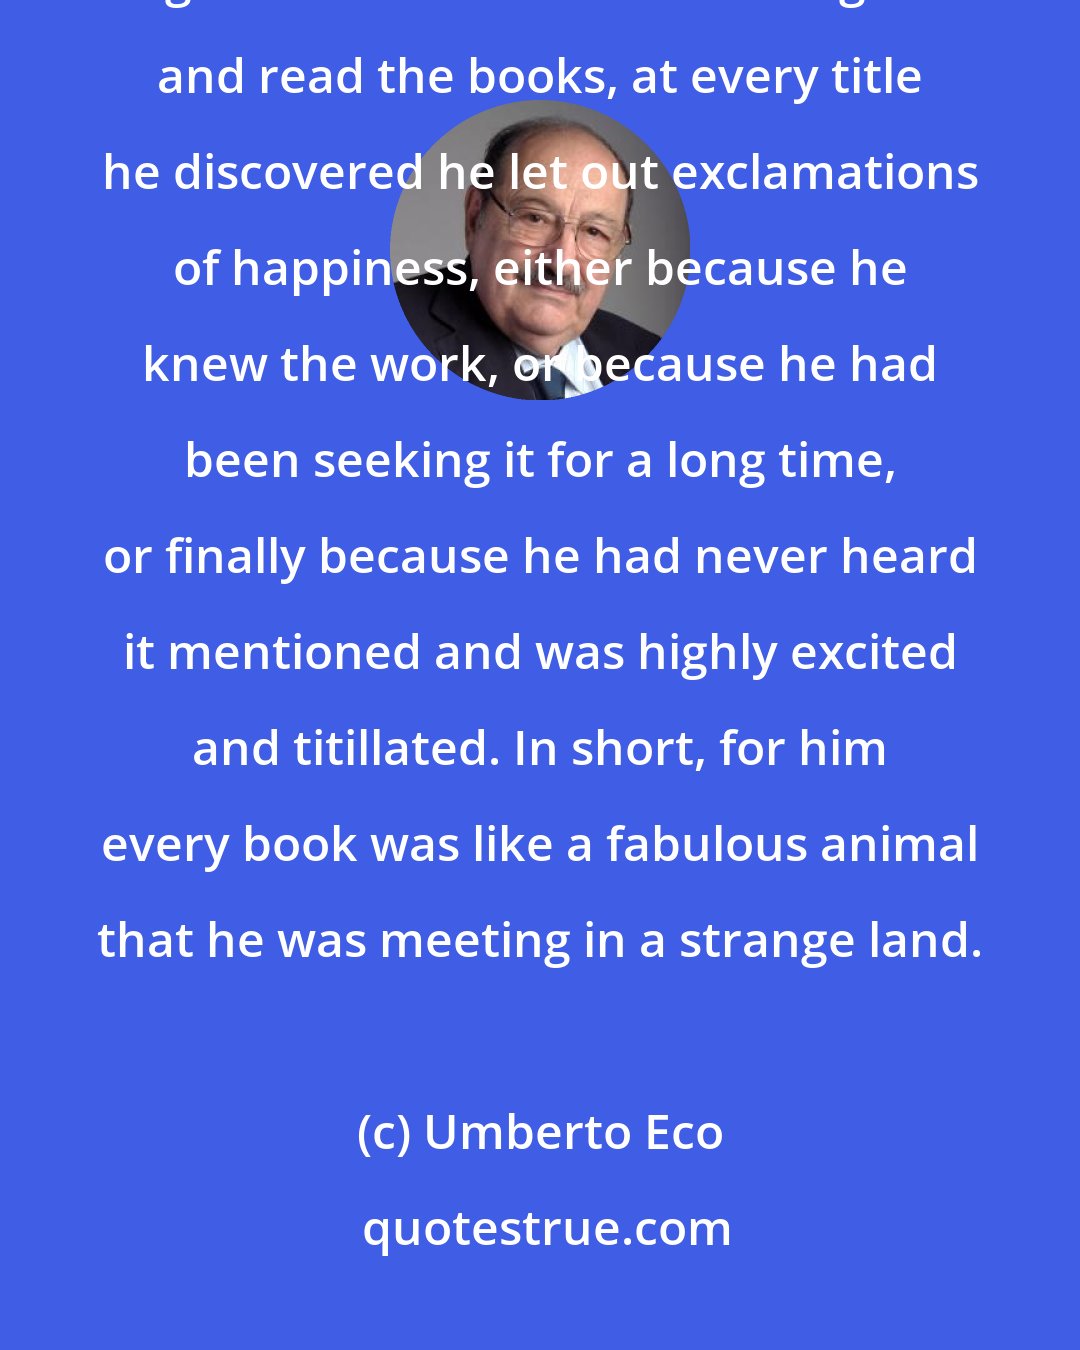 Umberto Eco: We stopped to browse in the cases, and now that William - with his new glasses on his nose - could linger and read the books, at every title he discovered he let out exclamations of happiness, either because he knew the work, or because he had been seeking it for a long time, or finally because he had never heard it mentioned and was highly excited and titillated. In short, for him every book was like a fabulous animal that he was meeting in a strange land.